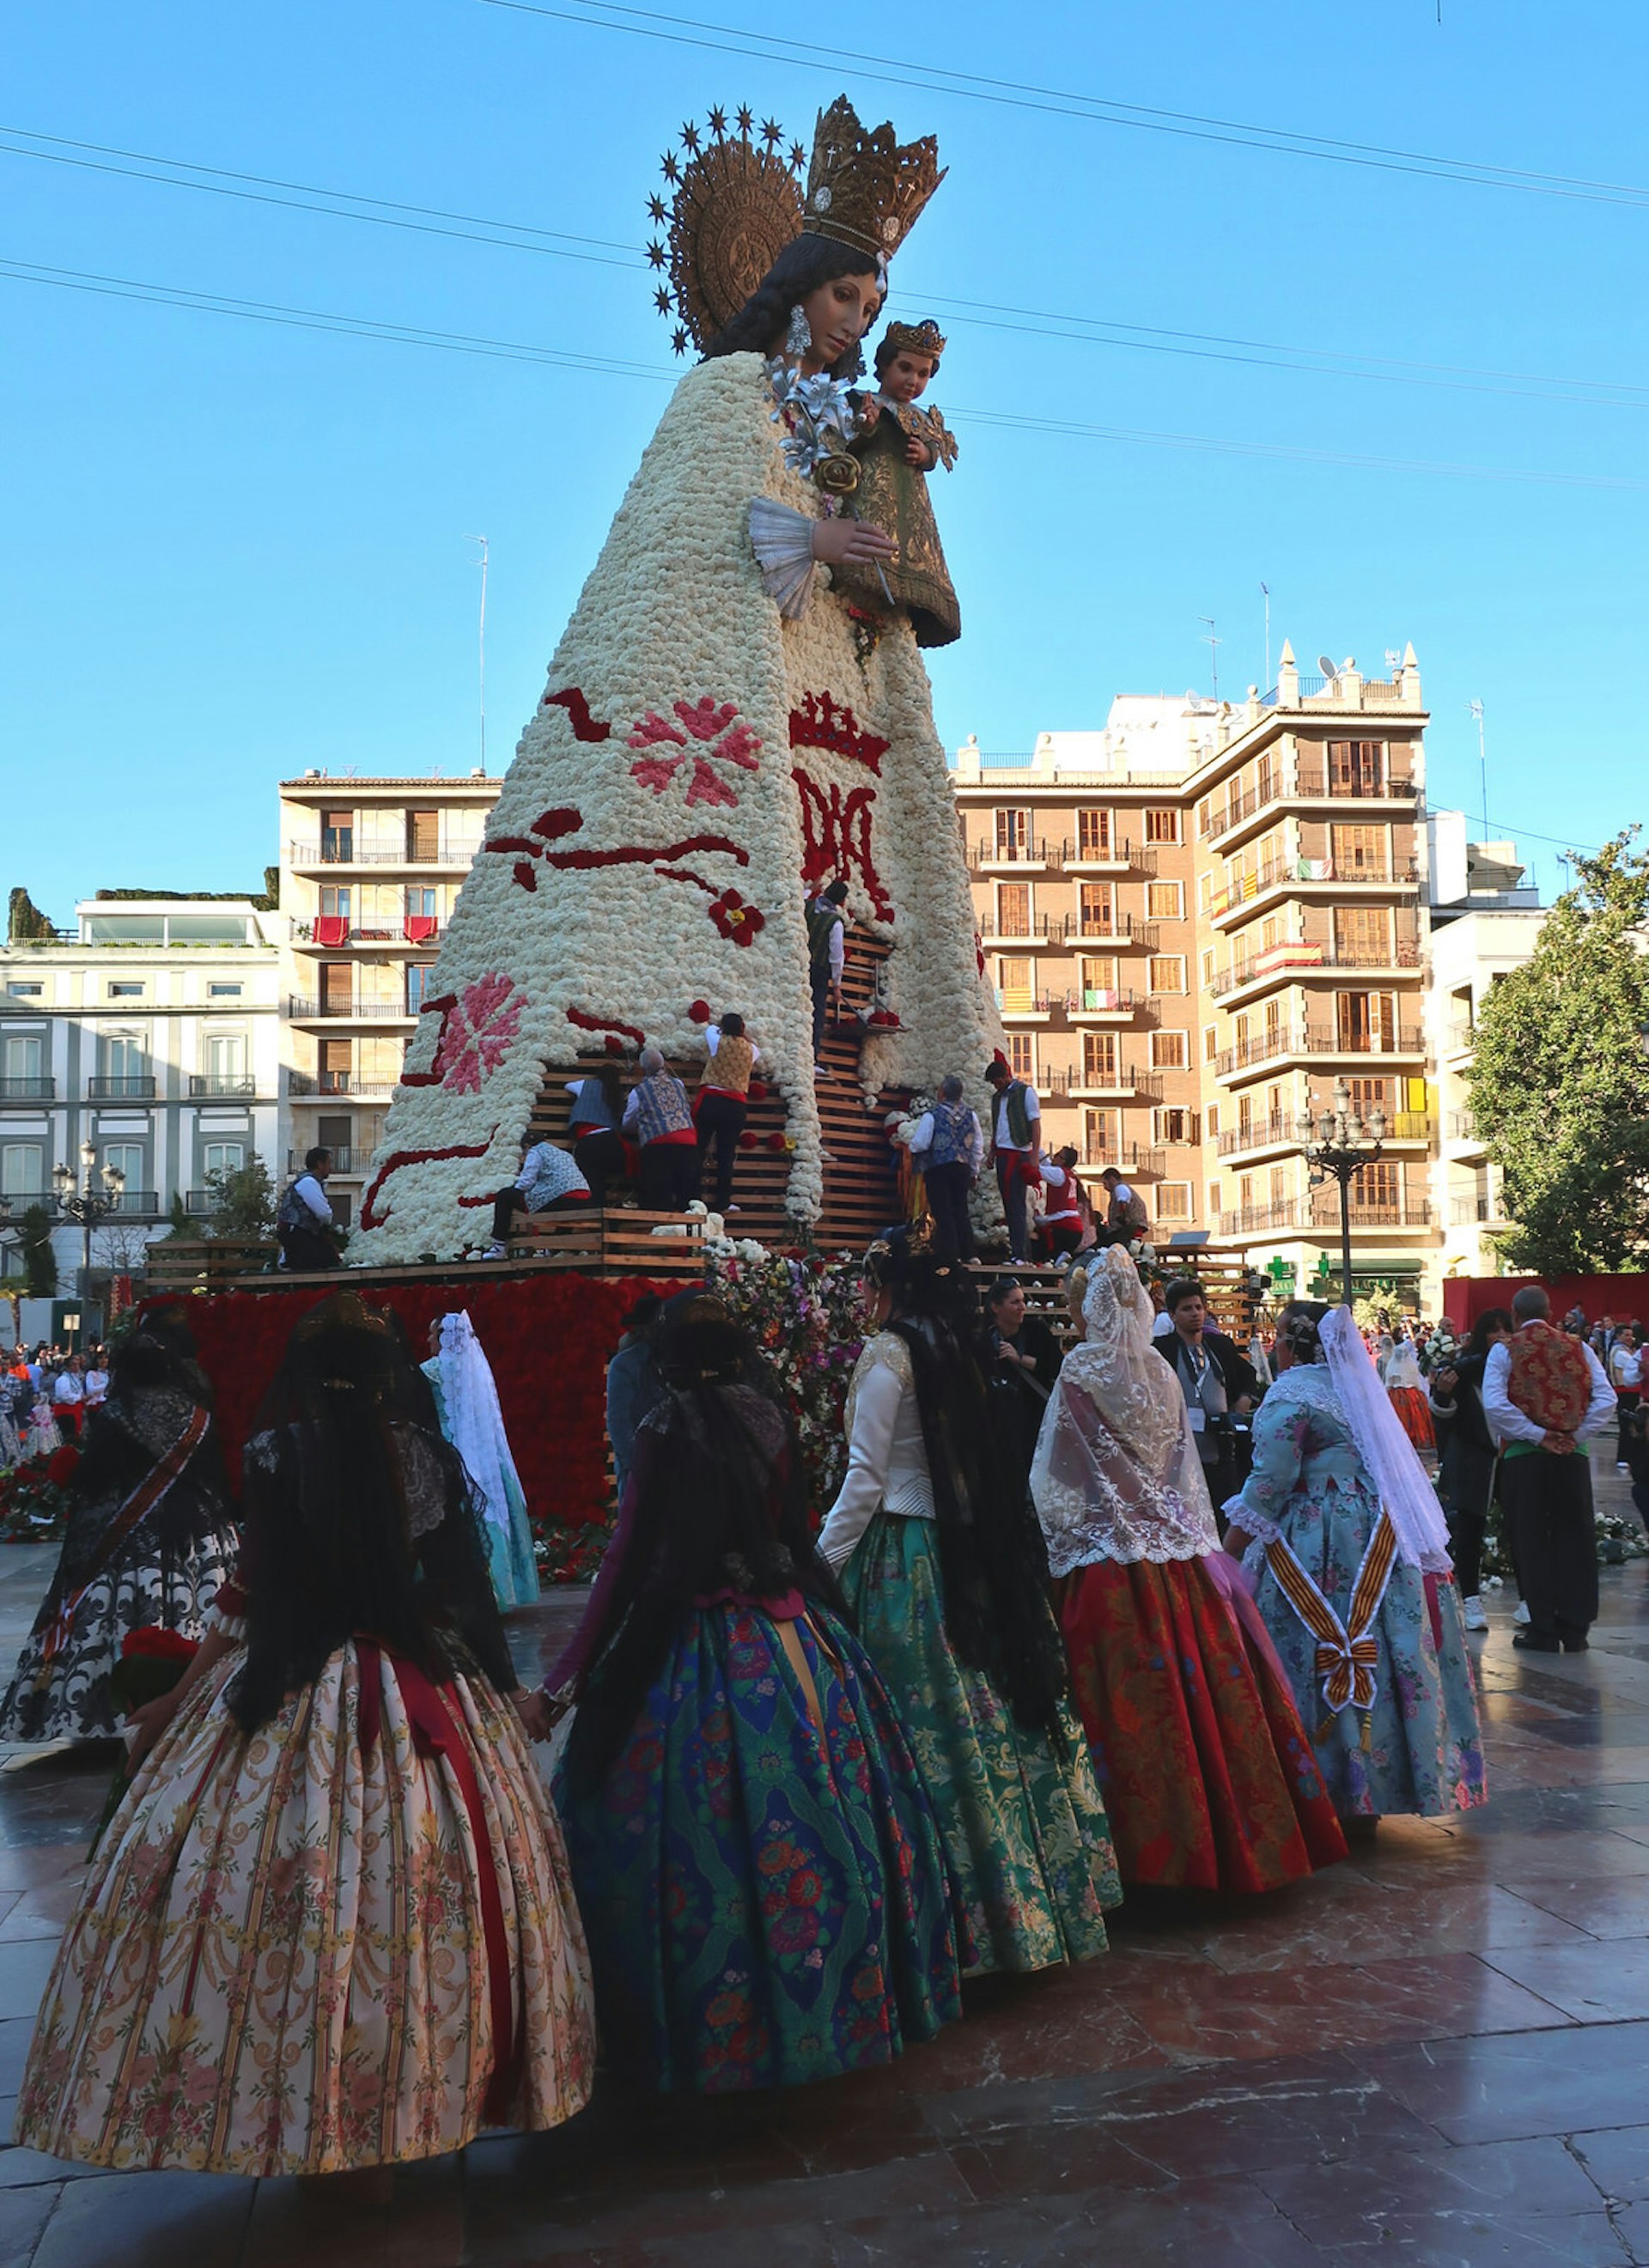 Five women in traditional dress look up at a wooden statue of the Virgin Mary, which is being decorated with bunches of flowers